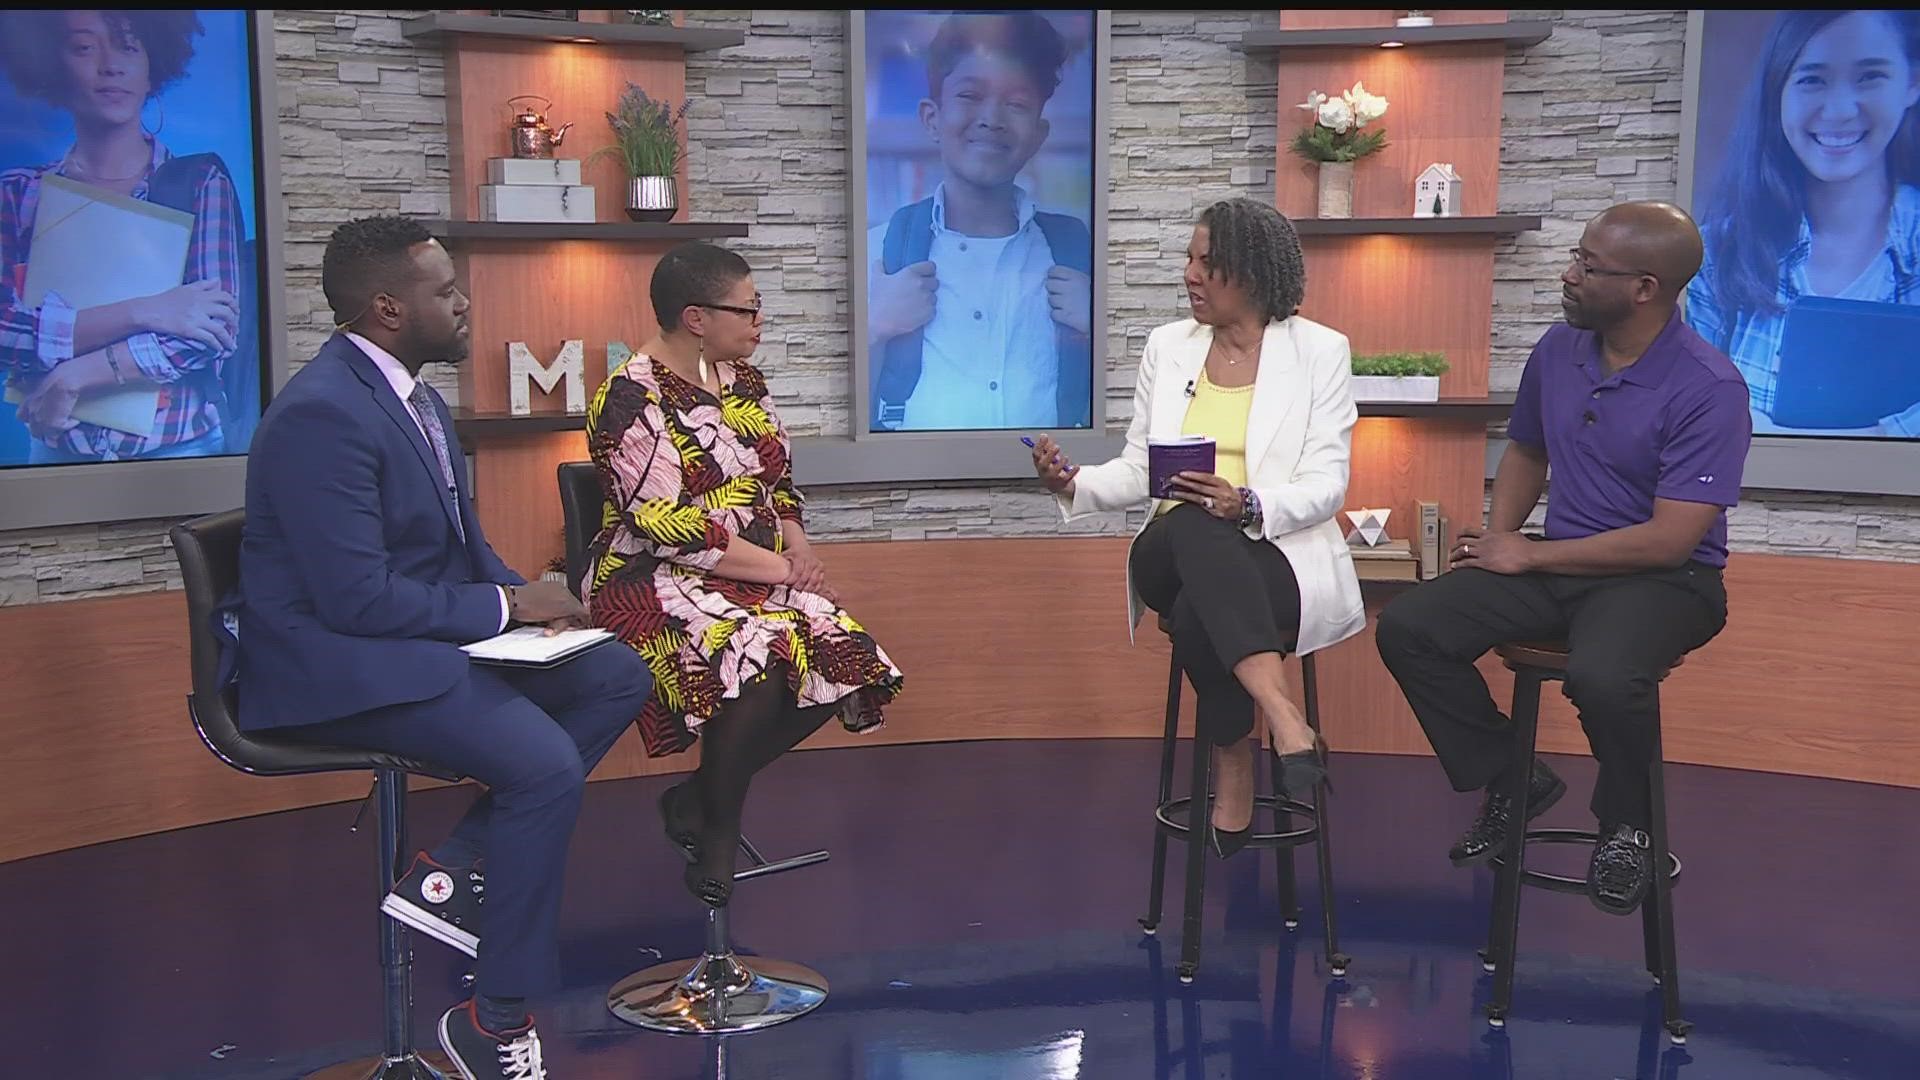 KARE 11 teamed up with Sheletta Brundidge to host an important discussion on violence and mental health in our schools